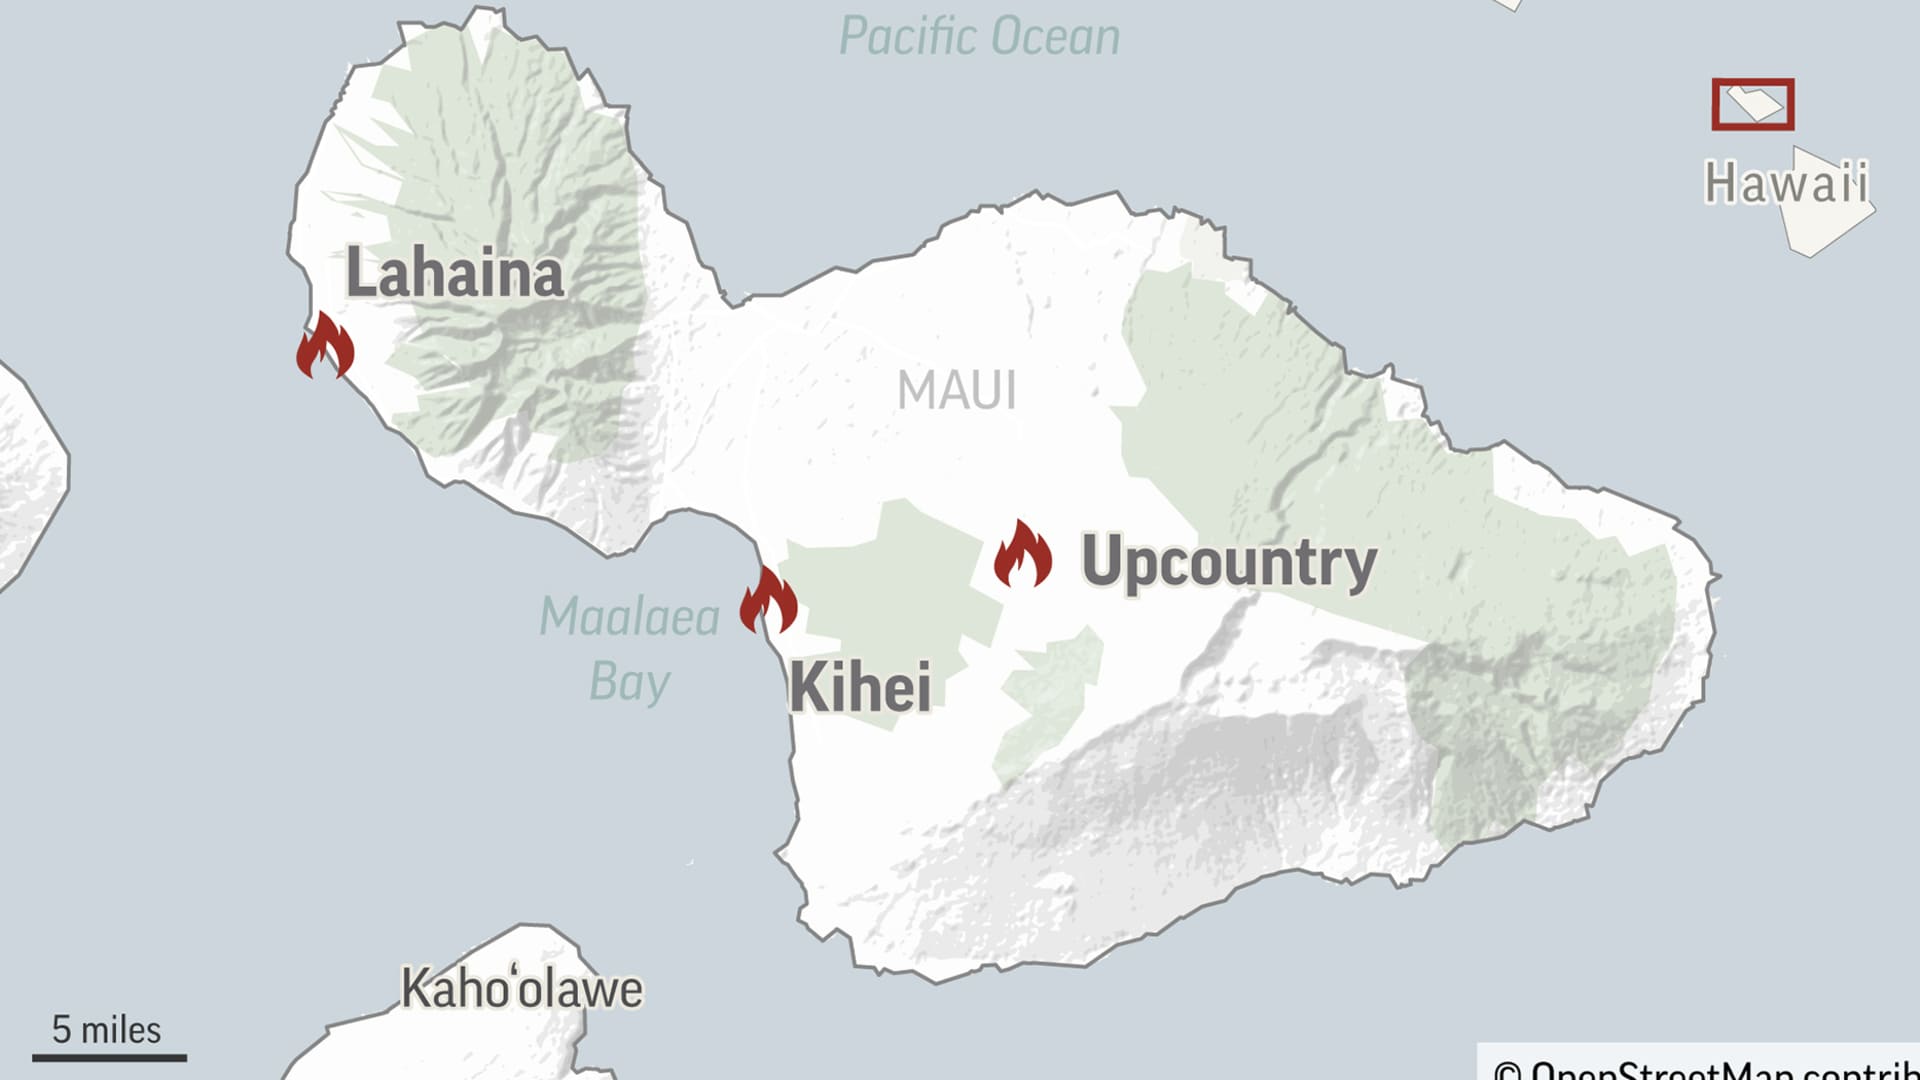 This graphic shows the location of fires on the island of Maui, Hawaii, Thursday, Aug. 10, 2023. Several thousand Hawaii residents raced to escape homes on Maui as the Lahaina fire swept across the island, killing multiple people and burning parts of a centuries-old town.